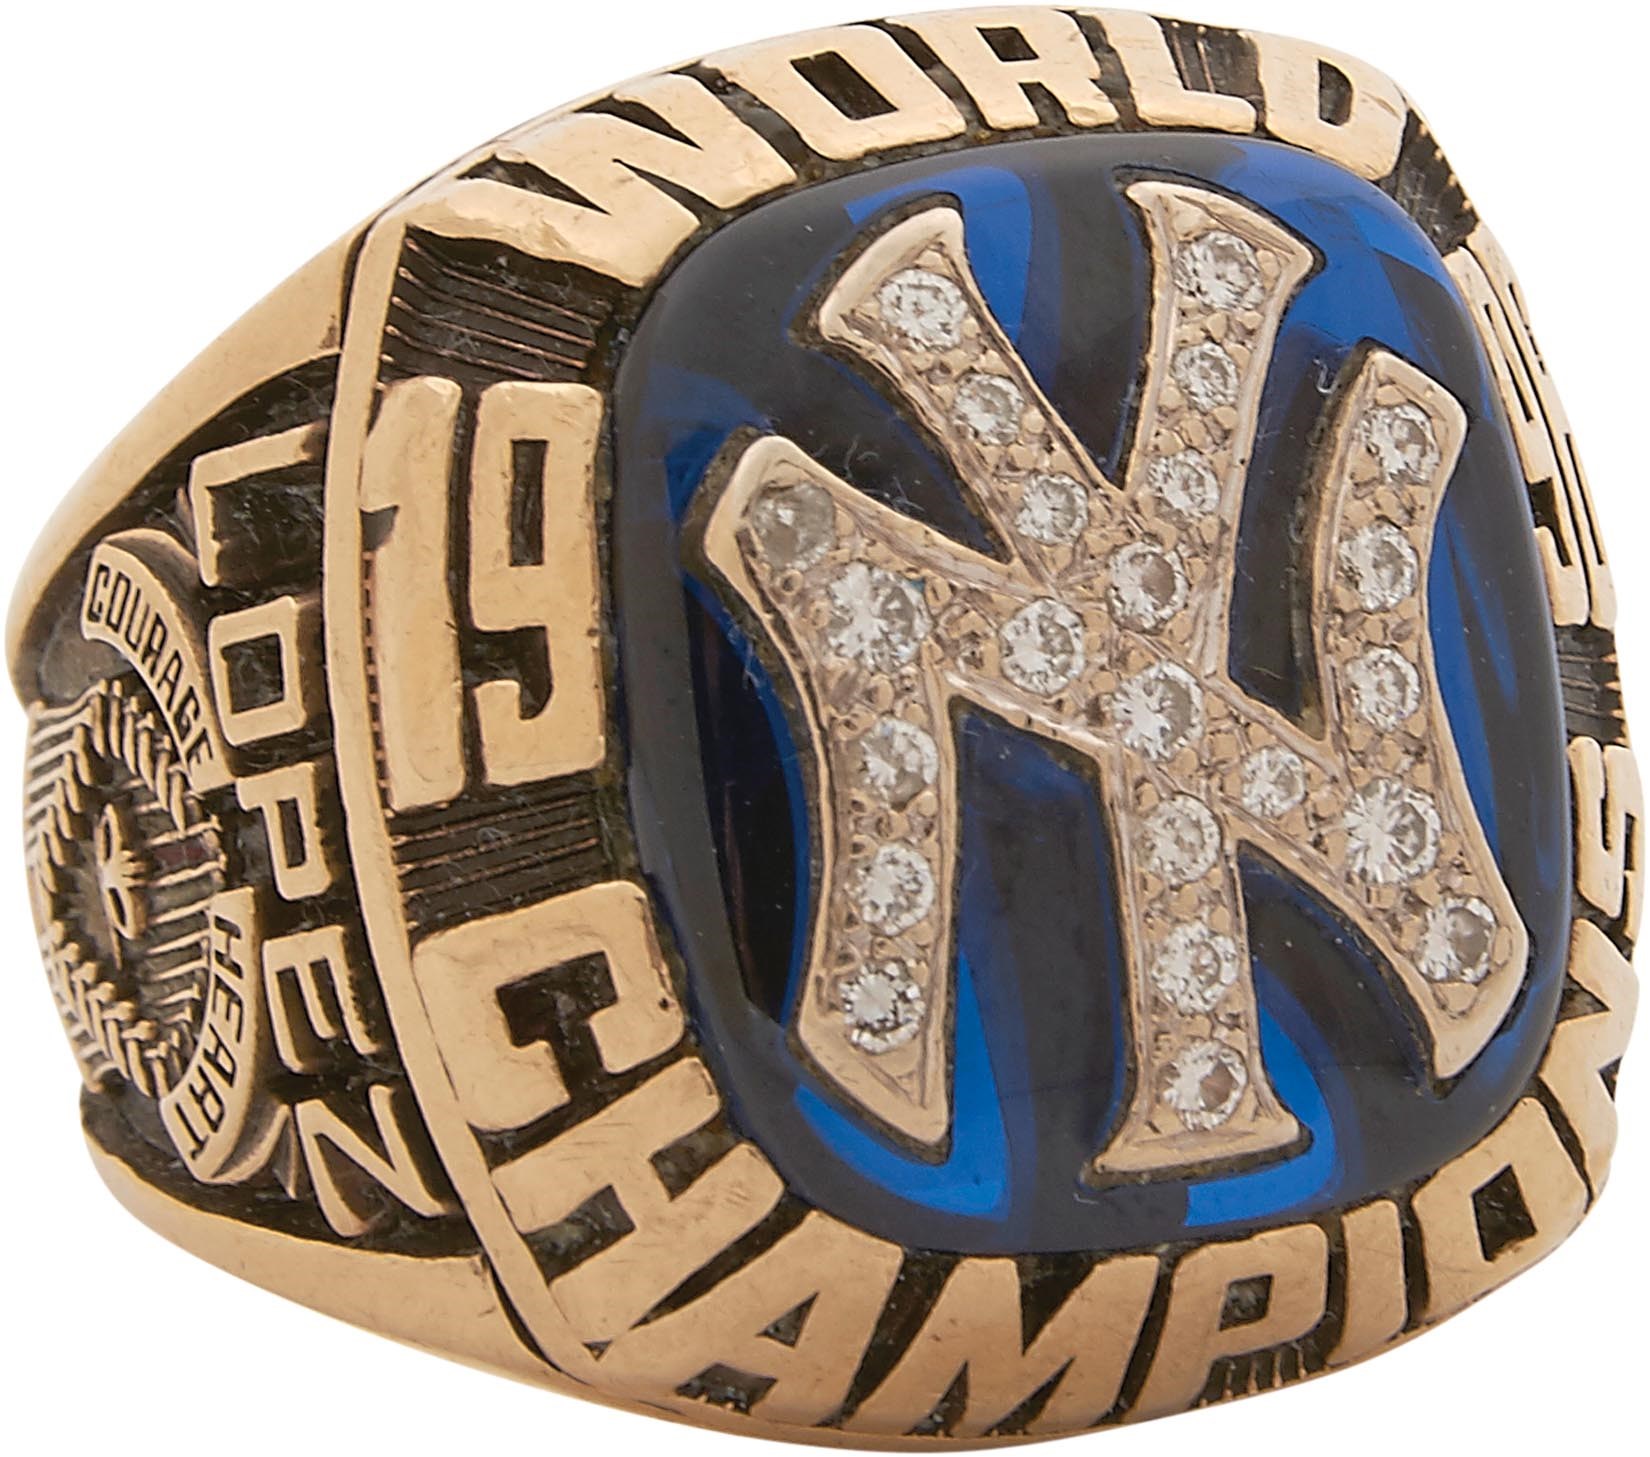 - 1996 New York Yankees World Series Championship Ring Presented to Hector Lopez